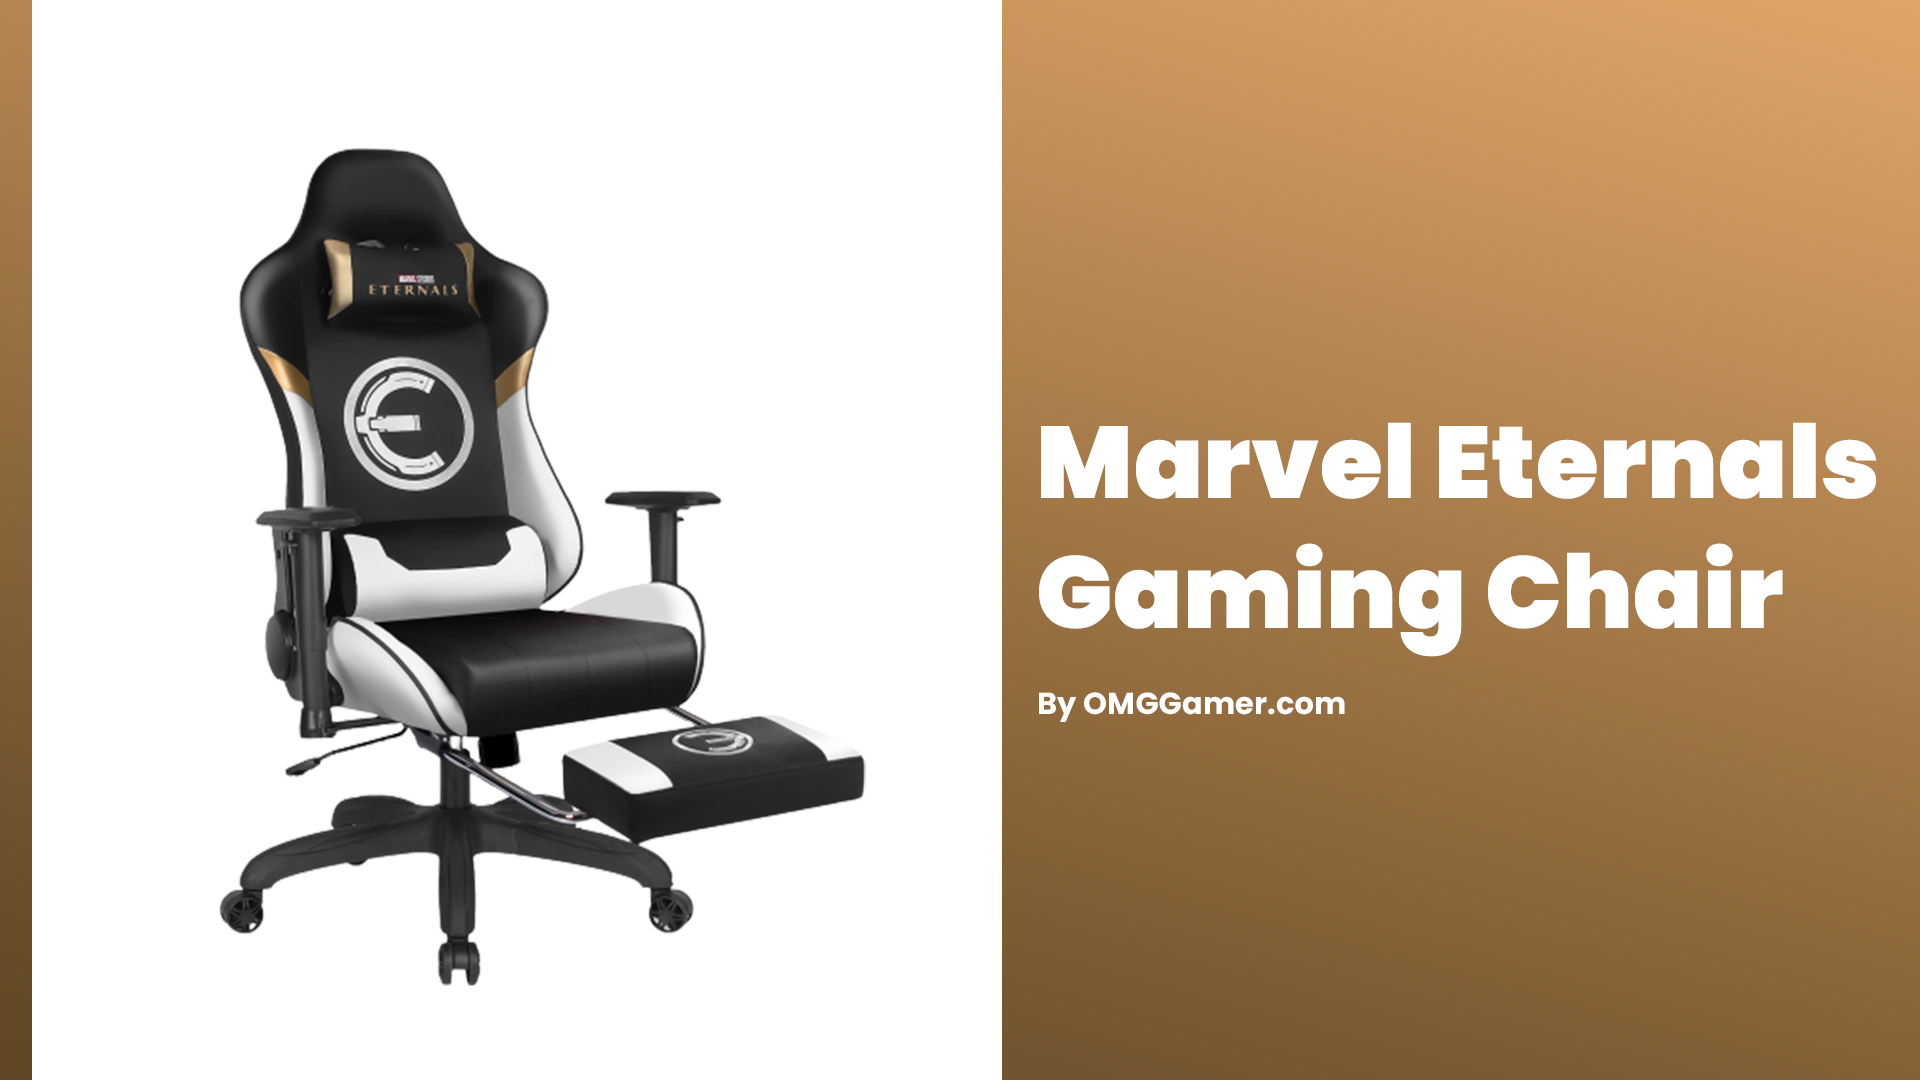 Marvel Eternals Gaming Chair